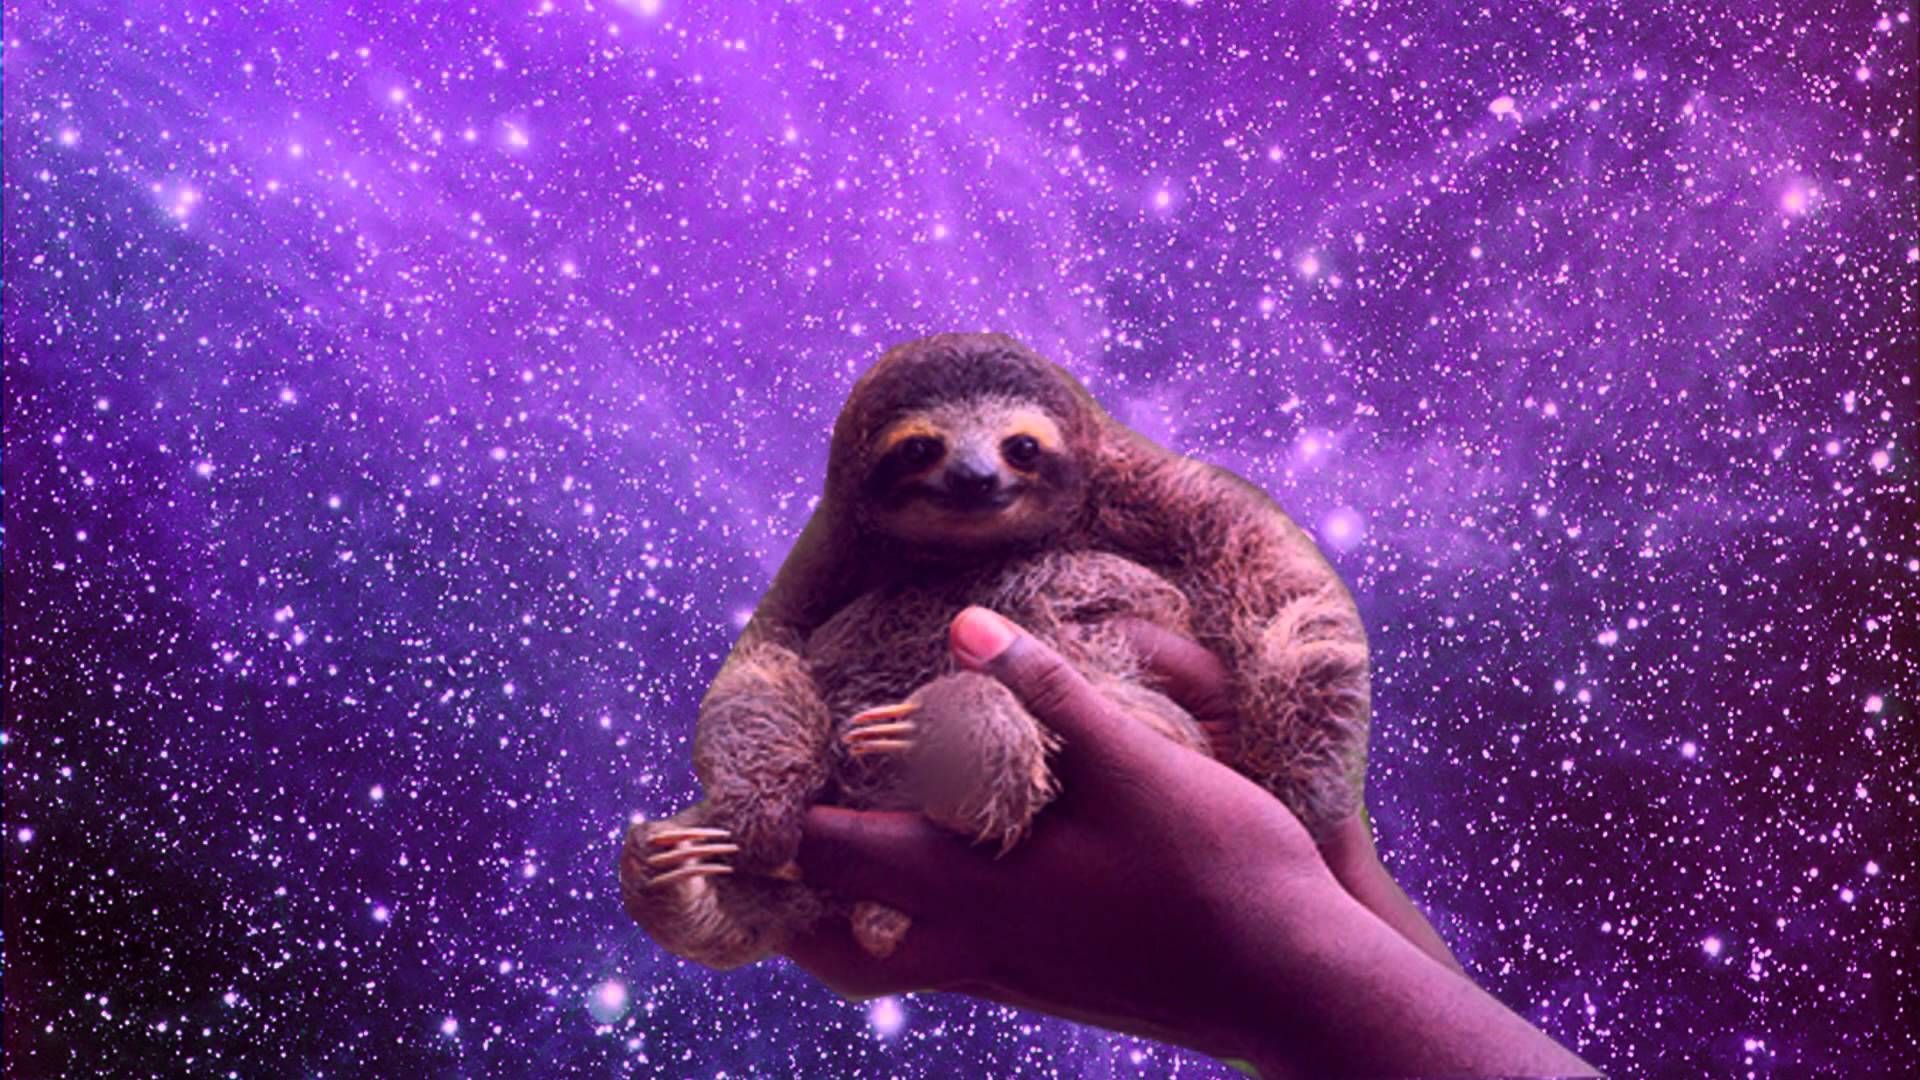 sloths in space .com